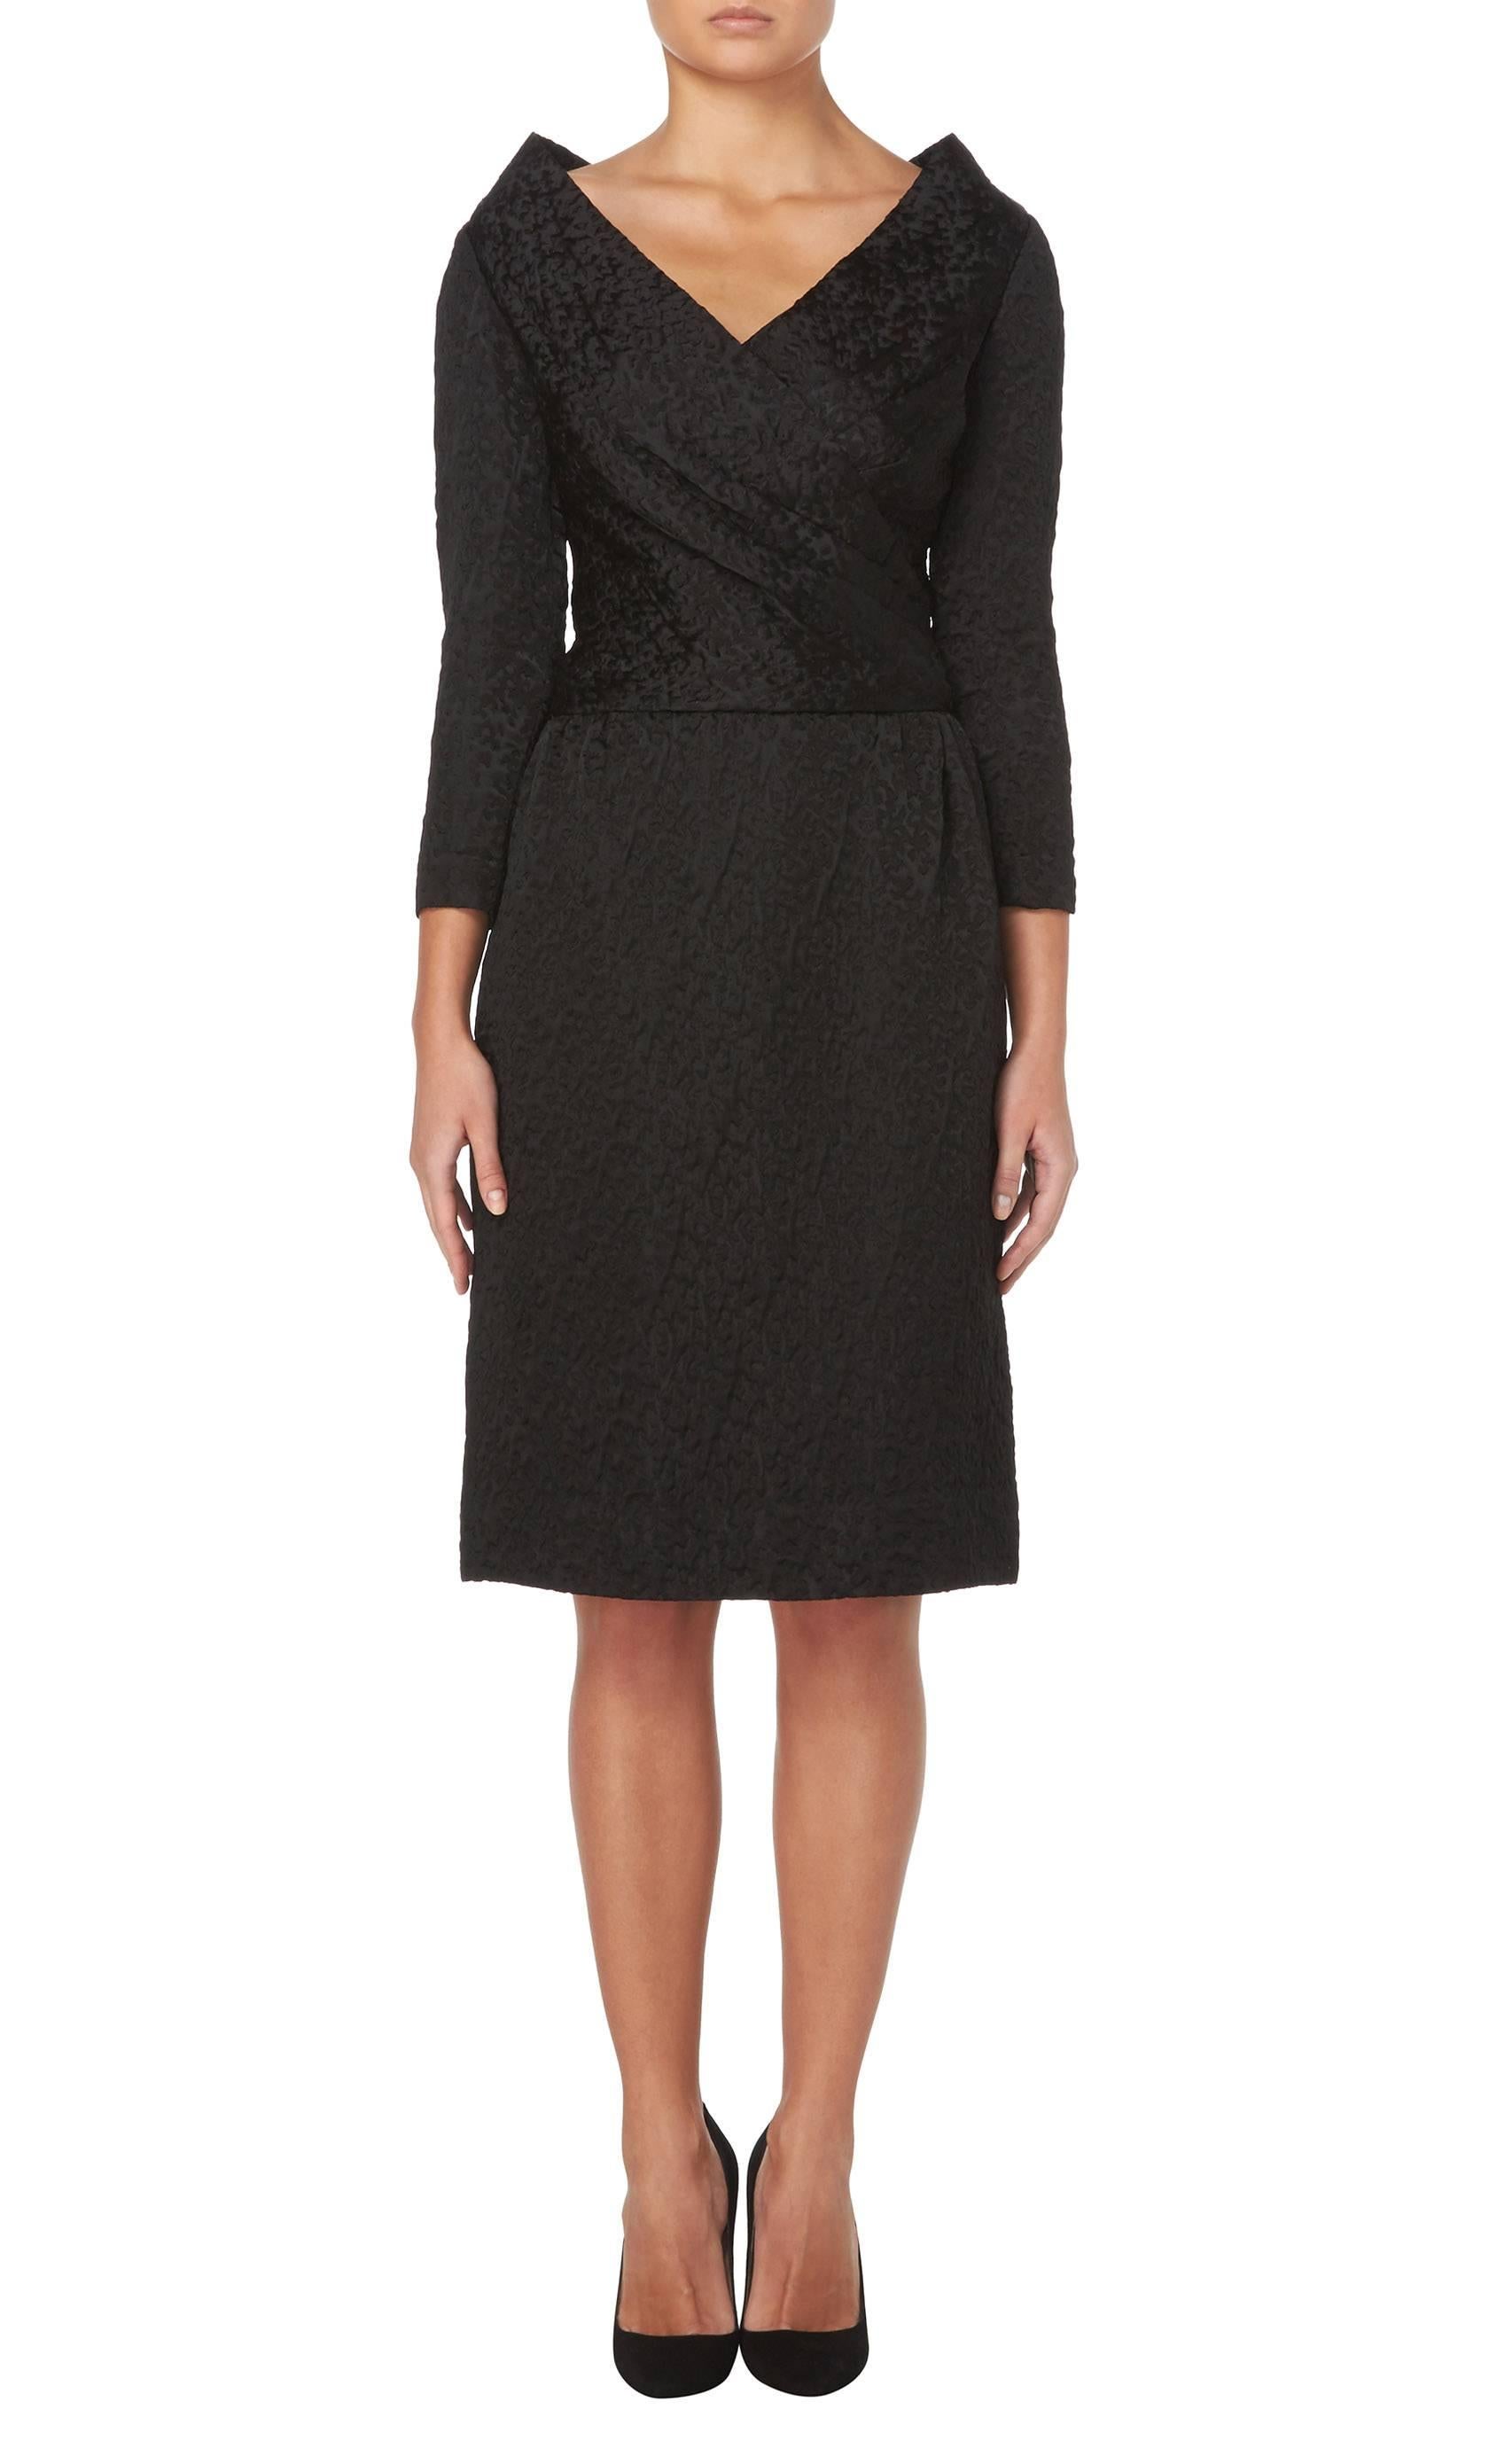 This incredibly chic little black dress by Hardy Amies will make a superb addition to any wardrobe and is perfect for everything from cocktail parties to dinners. Constructed in black cloqué silk, the dress has a flattering v-neckline, sitting high